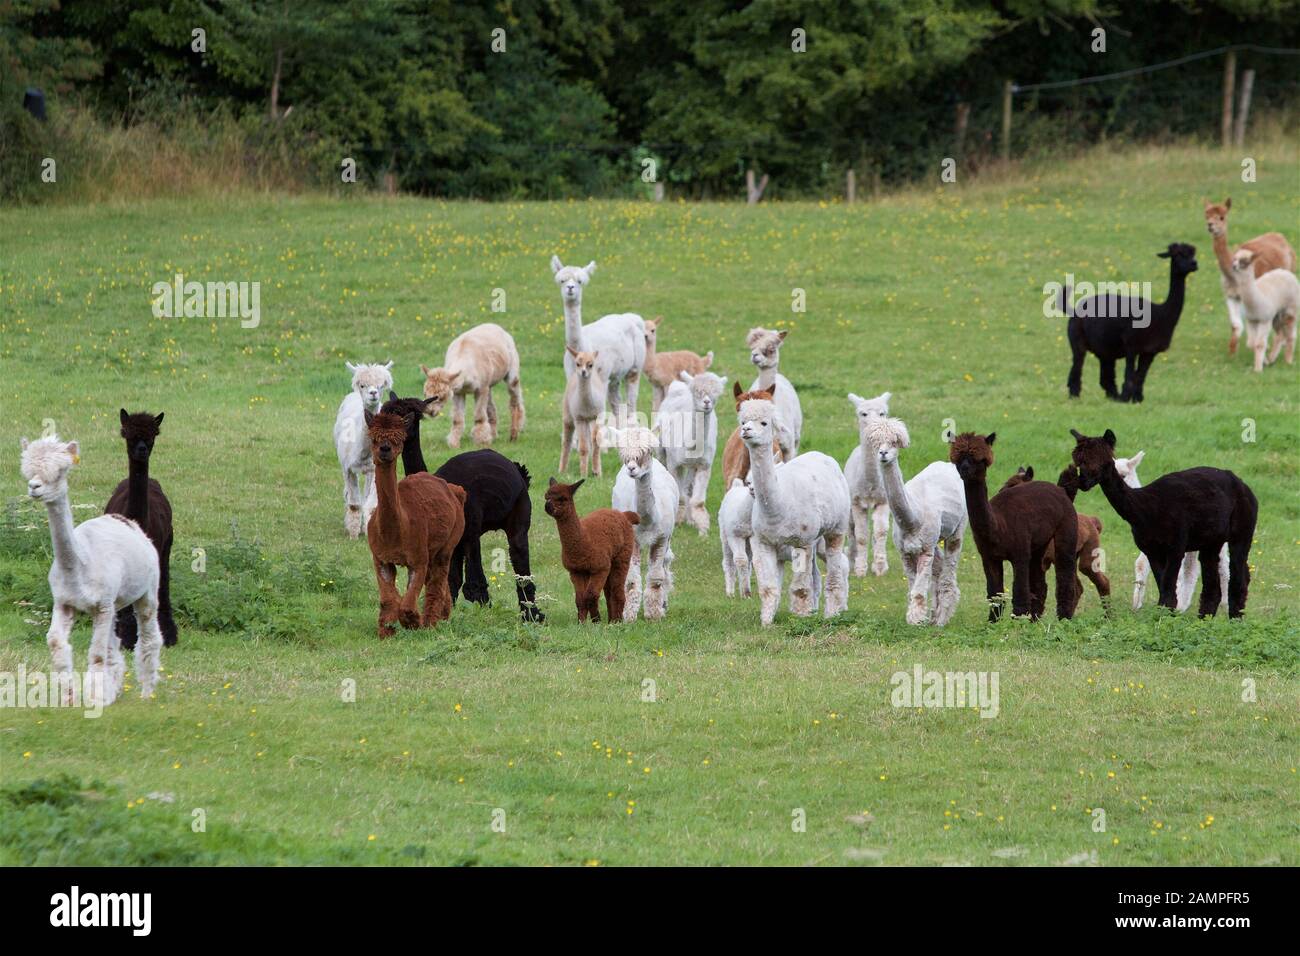 Alpacas pictured on a farm in Ireland. Stock Photo